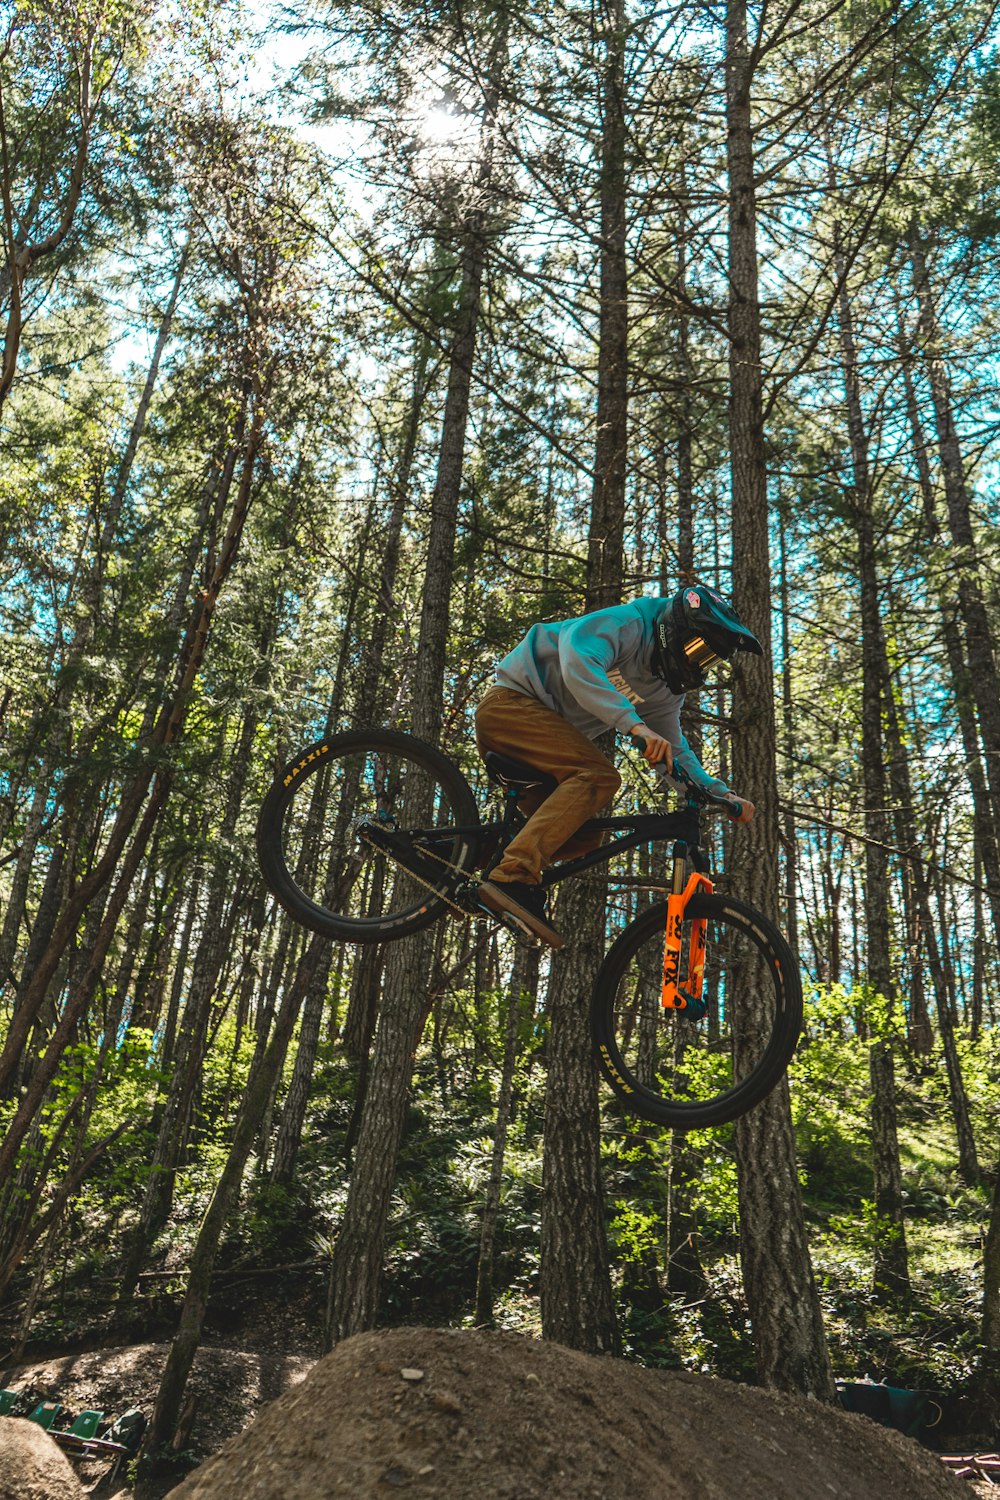 man in blue t-shirt riding bicycle in forest during daytime